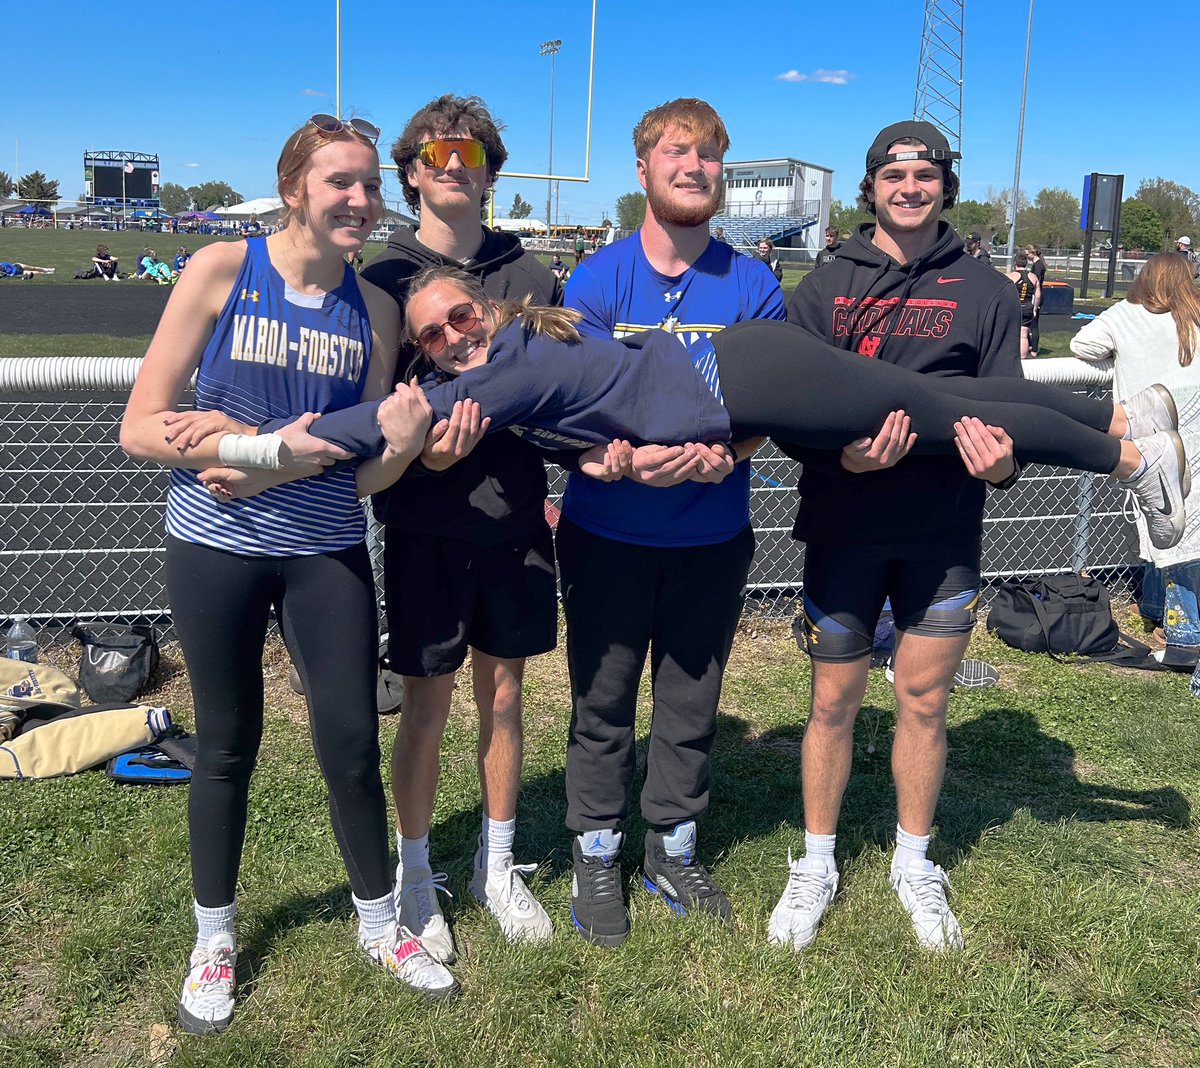 With track season winding down, I can’t emphasize enough how much I love our group of throwers! Been a great season so far, and now its time to put it all together for #championshipSZN